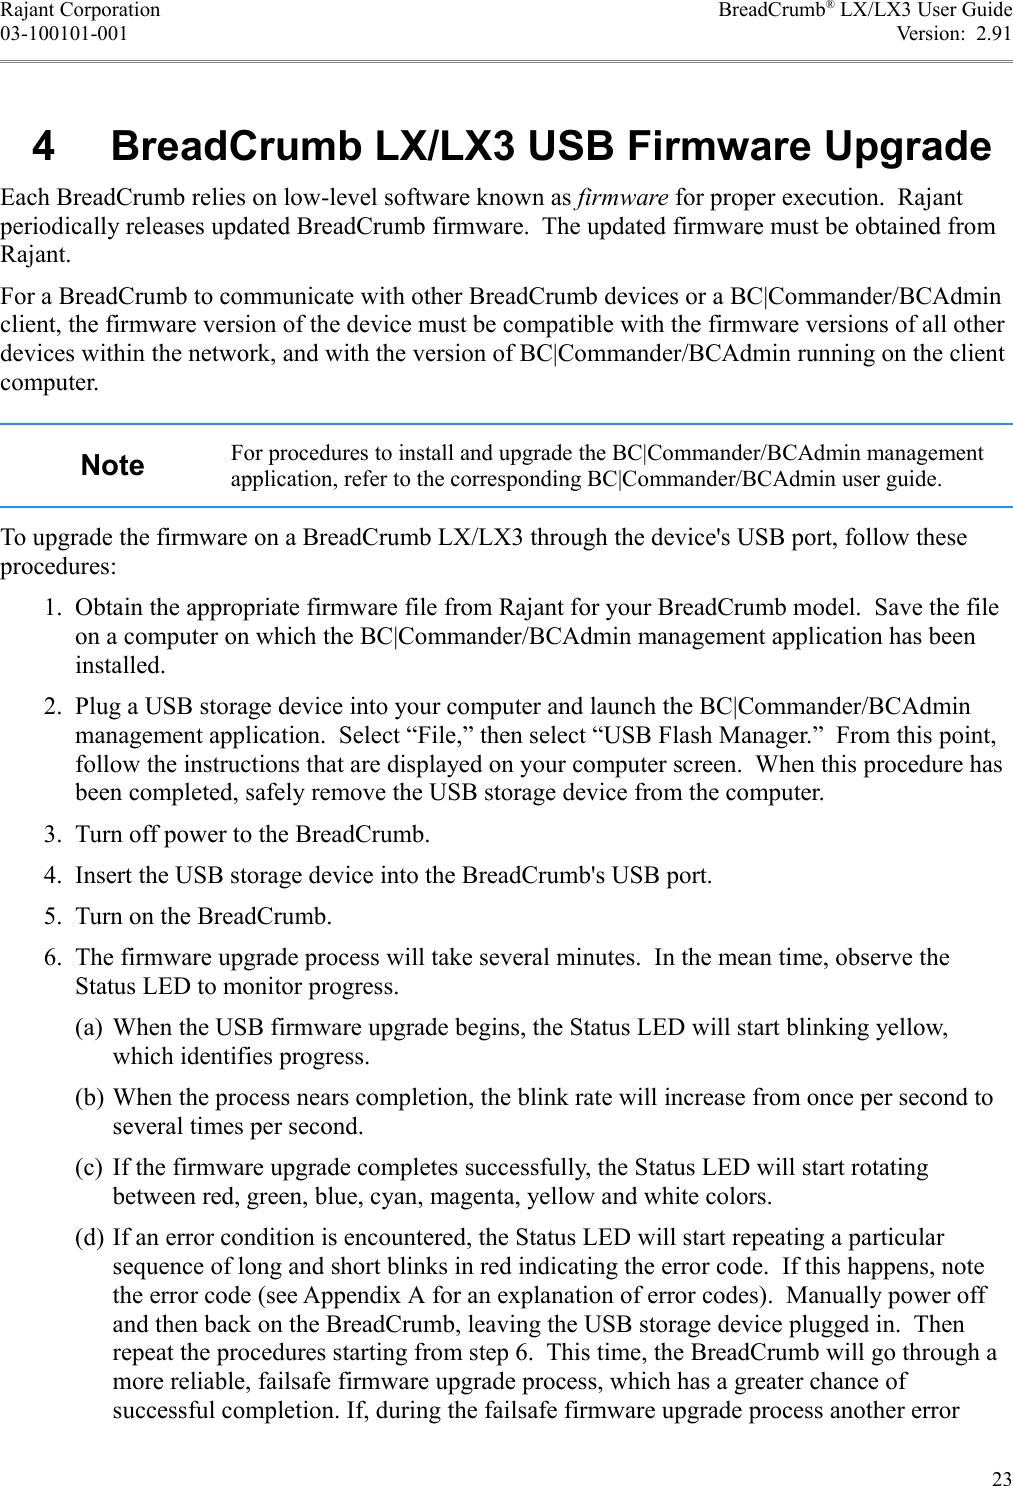 Rajant Corporation BreadCrumb® LX/LX3 User Guide03-100101-001 Version:  2.91 4  BreadCrumb LX/LX3 USB Firmware UpgradeEach BreadCrumb relies on low-level software known as firmware for proper execution.  Rajant periodically releases updated BreadCrumb firmware.  The updated firmware must be obtained from Rajant.For a BreadCrumb to communicate with other BreadCrumb devices or a BC|Commander/BCAdmin client, the firmware version of the device must be compatible with the firmware versions of all other devices within the network, and with the version of BC|Commander/BCAdmin running on the client computer.Note For procedures to install and upgrade the BC|Commander/BCAdmin management application, refer to the corresponding BC|Commander/BCAdmin user guide.To upgrade the firmware on a BreadCrumb LX/LX3 through the device&apos;s USB port, follow these procedures: 1. Obtain the appropriate firmware file from Rajant for your BreadCrumb model.  Save the file on a computer on which the BC|Commander/BCAdmin management application has been installed. 2. Plug a USB storage device into your computer and launch the BC|Commander/BCAdmin management application.  Select “File,” then select “USB Flash Manager.”  From this point, follow the instructions that are displayed on your computer screen.  When this procedure has been completed, safely remove the USB storage device from the computer. 3. Turn off power to the BreadCrumb. 4. Insert the USB storage device into the BreadCrumb&apos;s USB port. 5. Turn on the BreadCrumb. 6. The firmware upgrade process will take several minutes.  In the mean time, observe the Status LED to monitor progress.(a) When the USB firmware upgrade begins, the Status LED will start blinking yellow, which identifies progress.(b) When the process nears completion, the blink rate will increase from once per second to several times per second.(c) If the firmware upgrade completes successfully, the Status LED will start rotating between red, green, blue, cyan, magenta, yellow and white colors.(d) If an error condition is encountered, the Status LED will start repeating a particular sequence of long and short blinks in red indicating the error code.  If this happens, note the error code (see Appendix A for an explanation of error codes).  Manually power off and then back on the BreadCrumb, leaving the USB storage device plugged in.  Then repeat the procedures starting from step 6.  This time, the BreadCrumb will go through a more reliable, failsafe firmware upgrade process, which has a greater chance of successful completion. If, during the failsafe firmware upgrade process another error 23